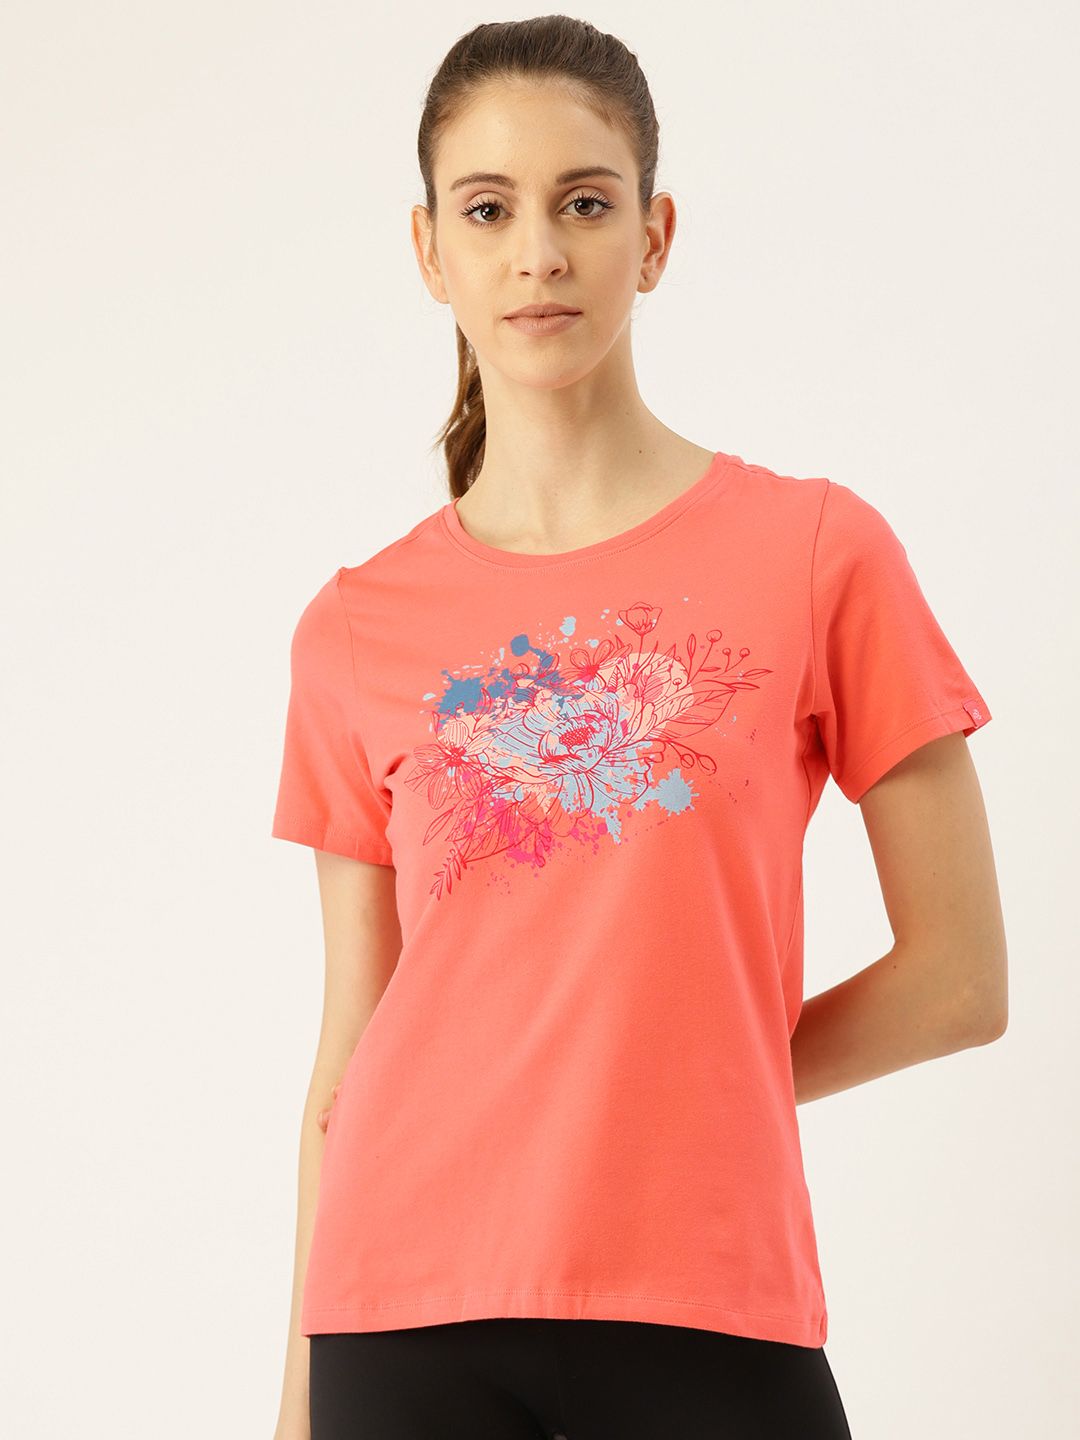 Jockey Women Coral Pink & Blue Comfort Fit Printed Round Neck T-shirt Price in India